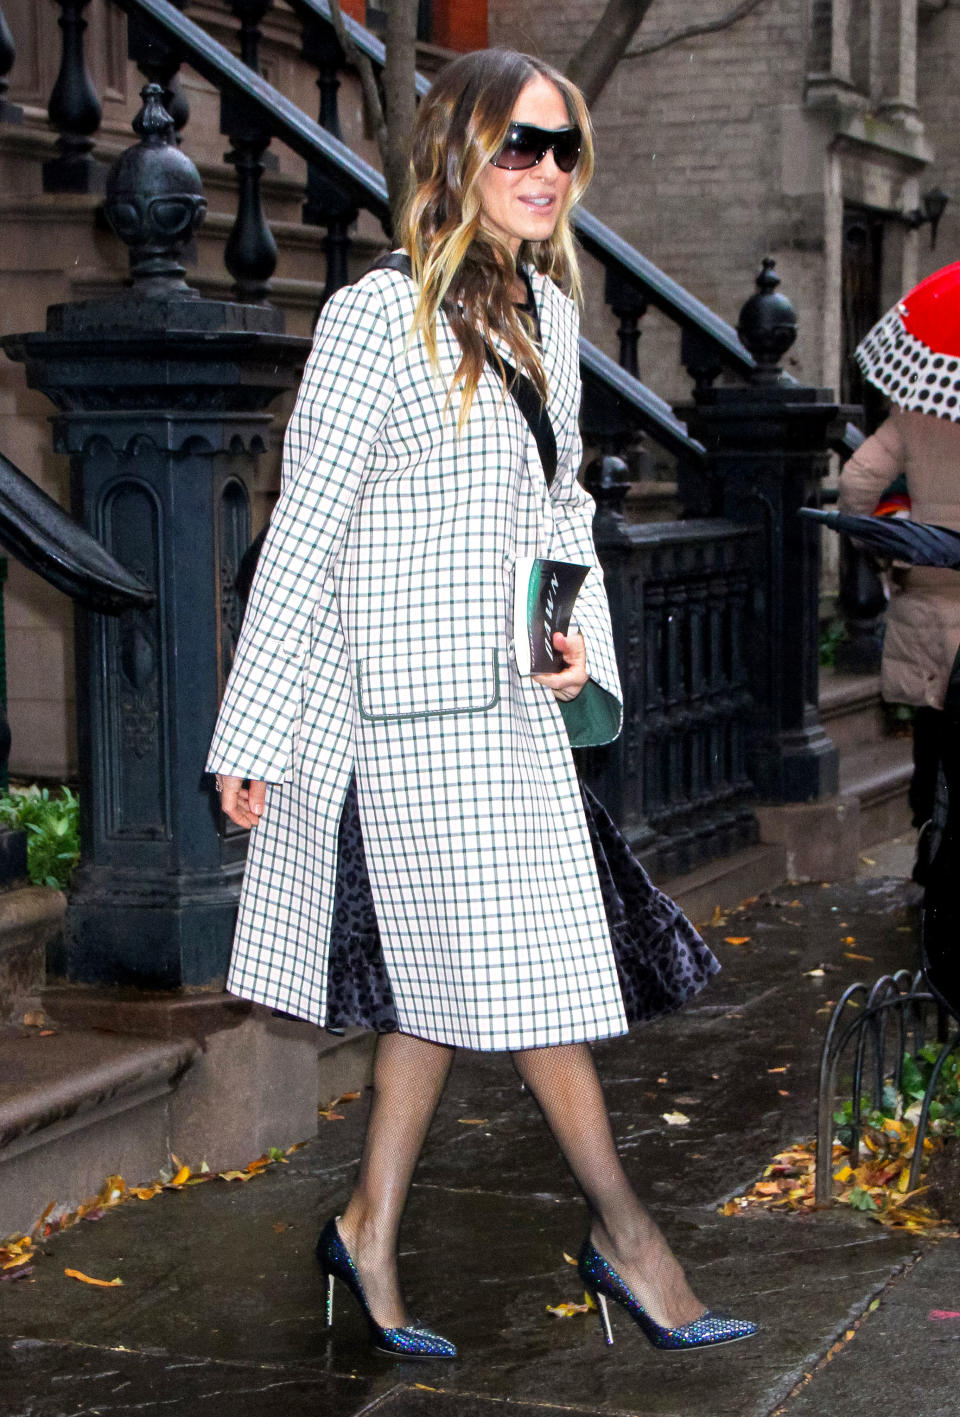 On her way to the Muse Awards in NYC on Thursday, December 13, the actress topped off her velvet black Batsheva frock and sparkly pumps with a grey and white check coat that Carrie Bradshaw would approve of.